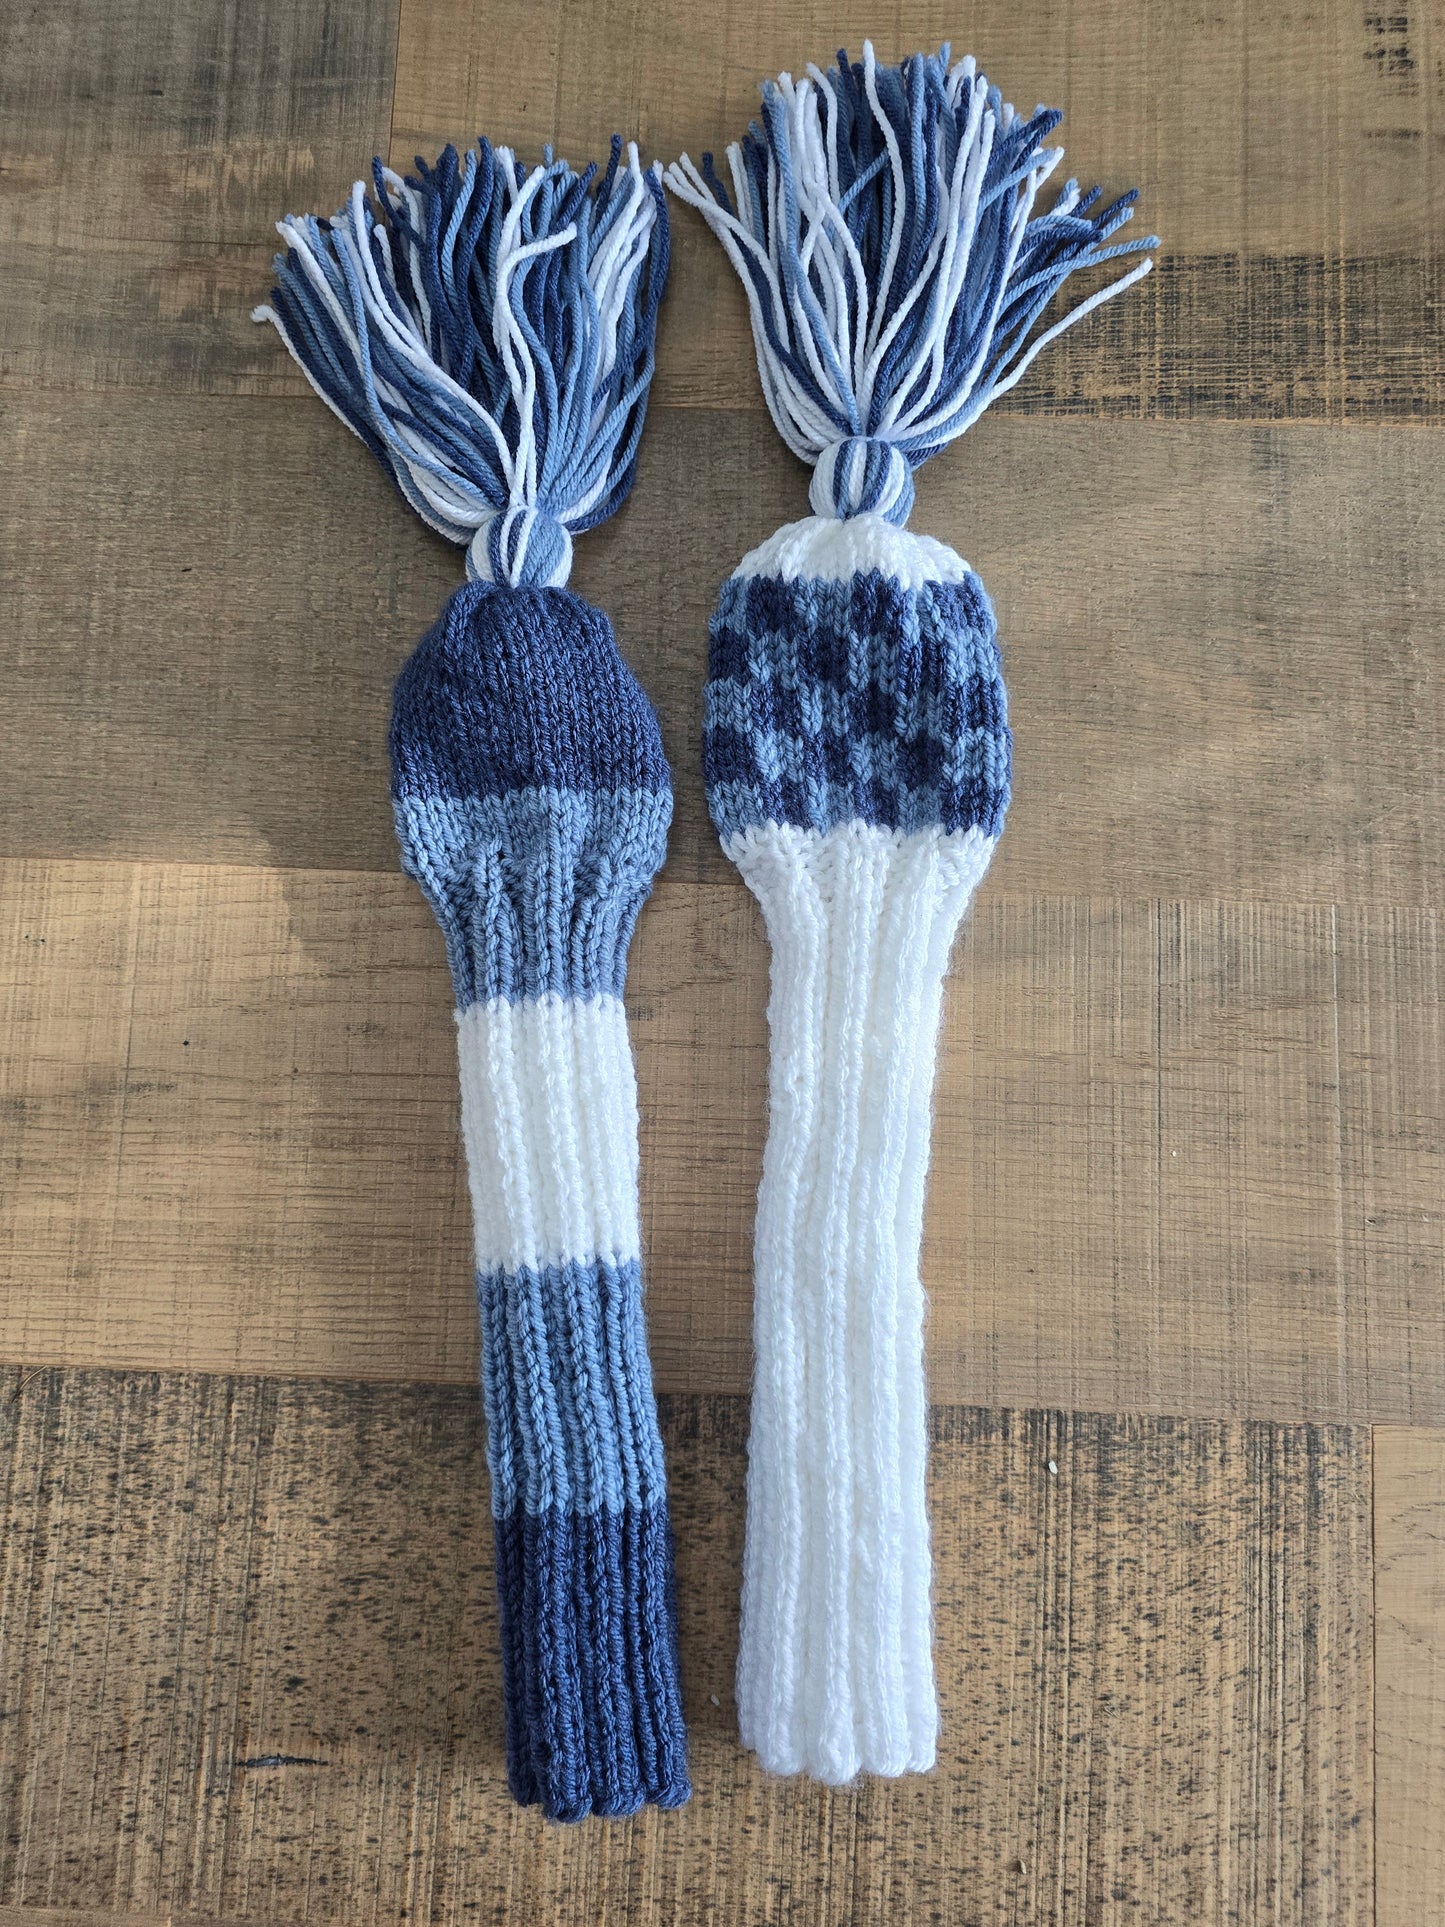 Two Golf Club Head Covers Retro-Vintage Blue & White with Tassels for Fairway Woods